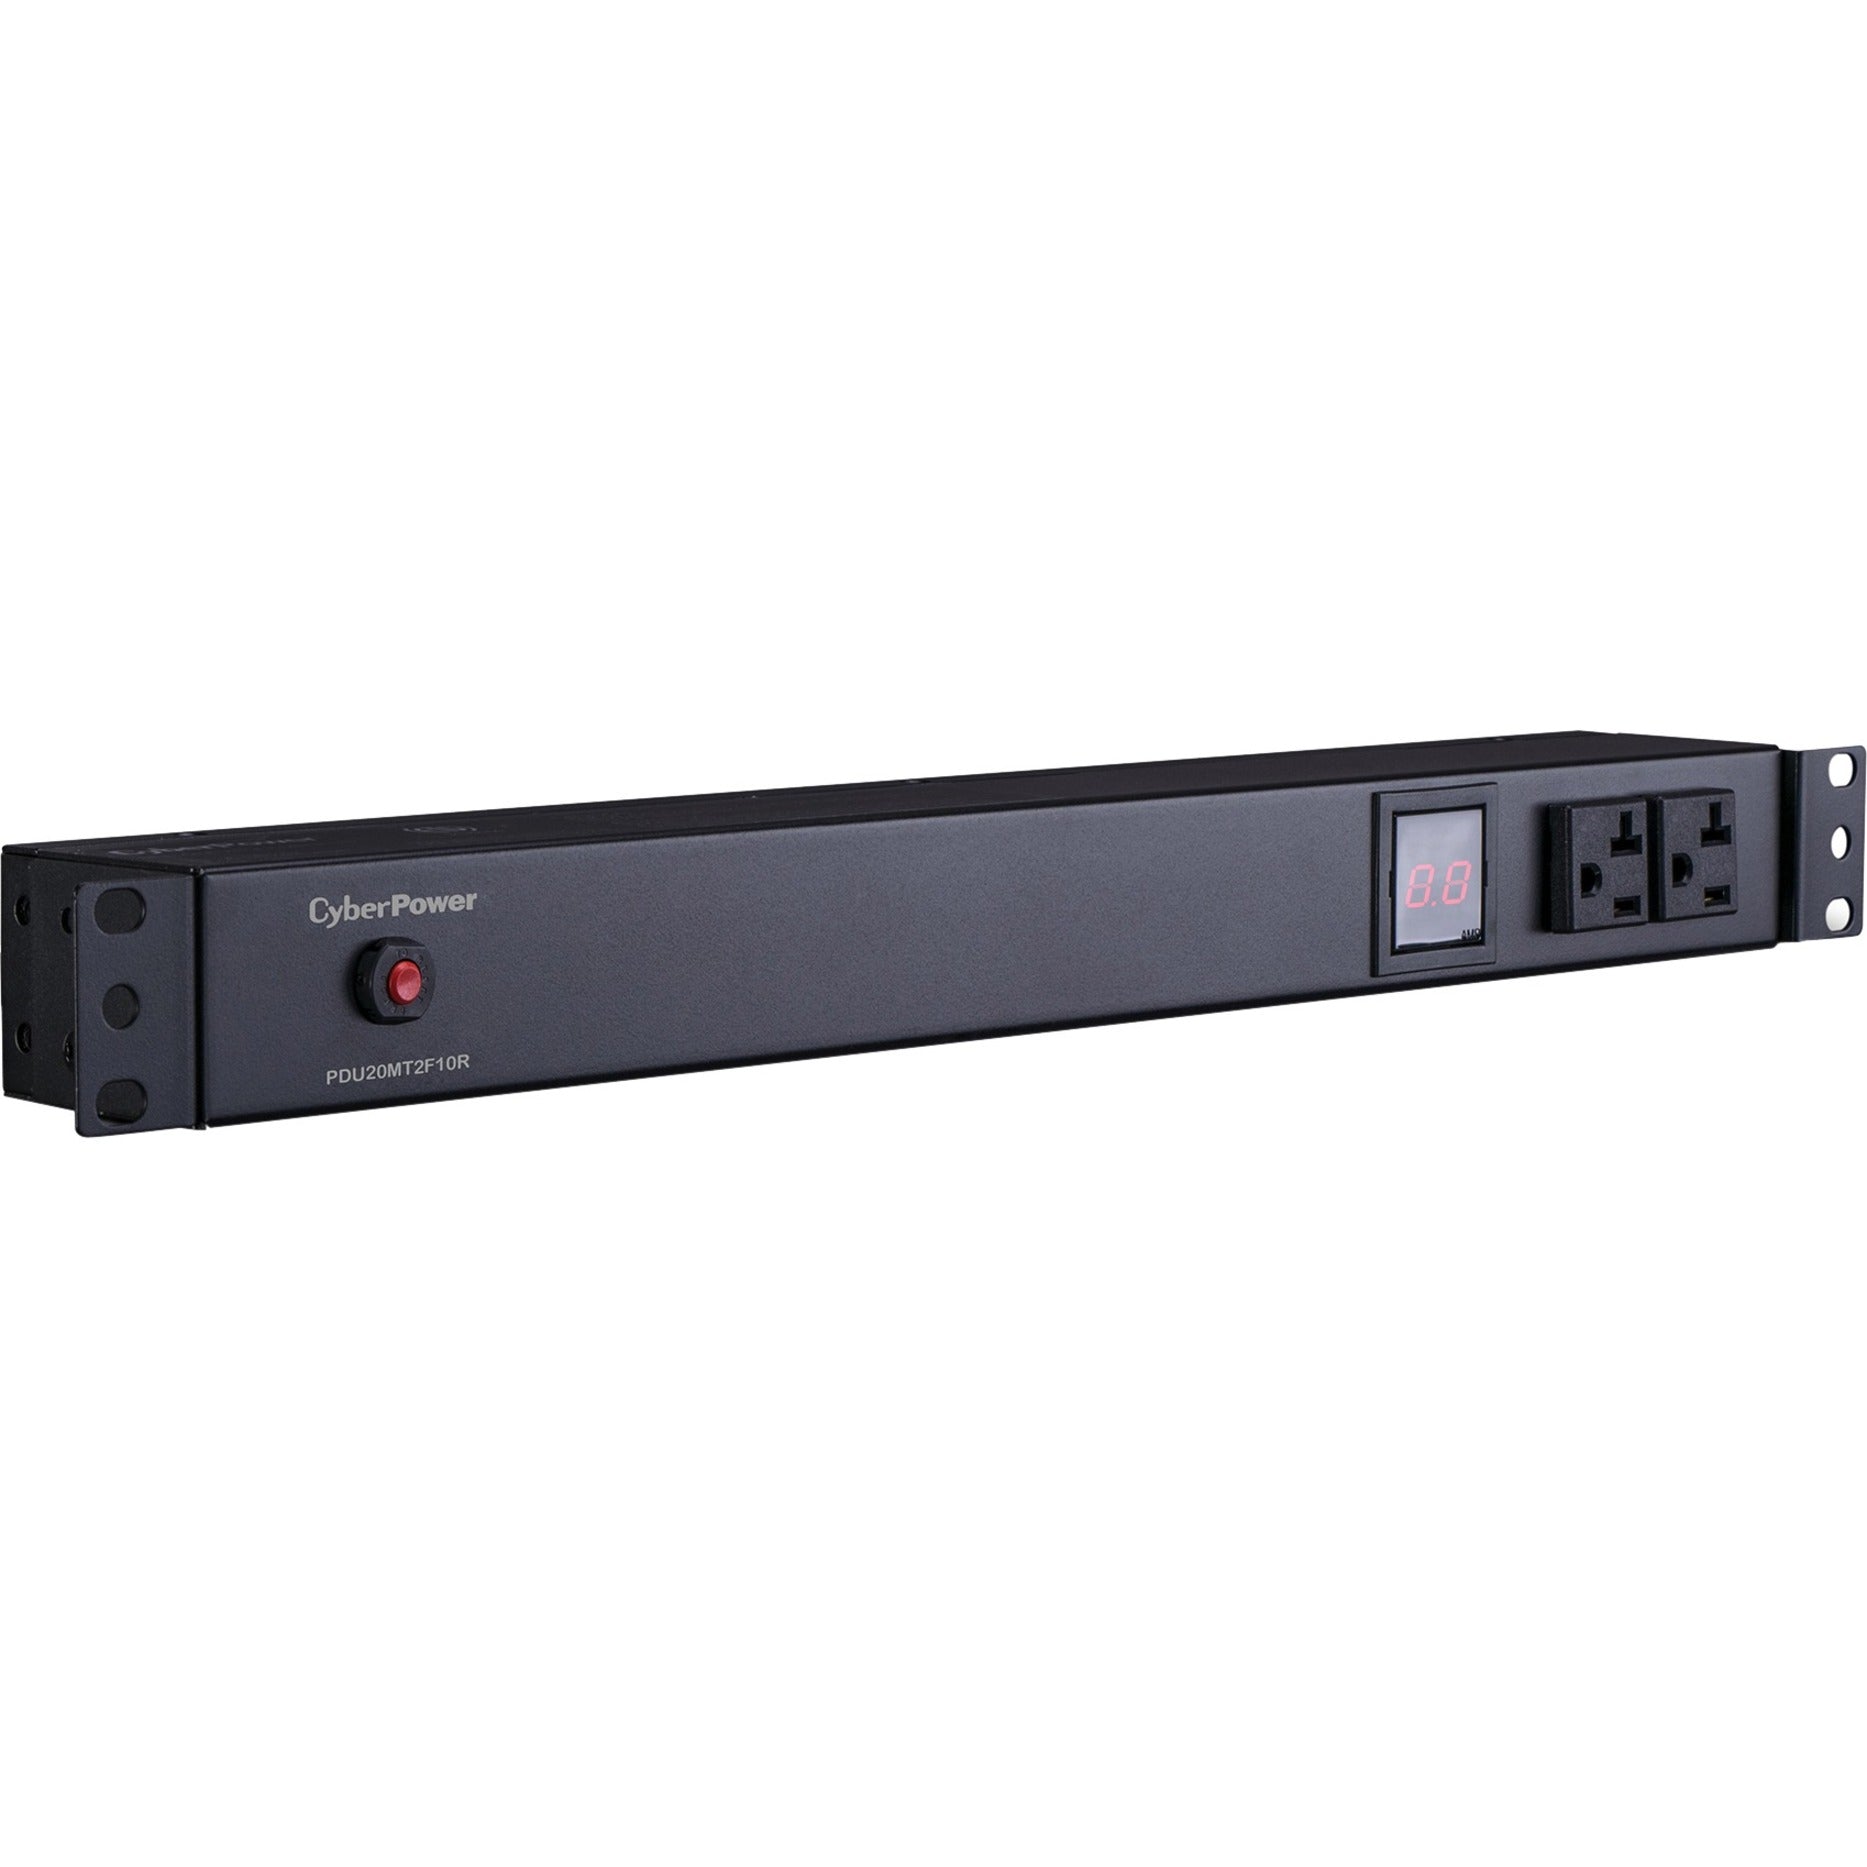 CyberPower PDU20MT2F10R Metered PDU 12-Outlets 20A 120V AC Rack-mountable